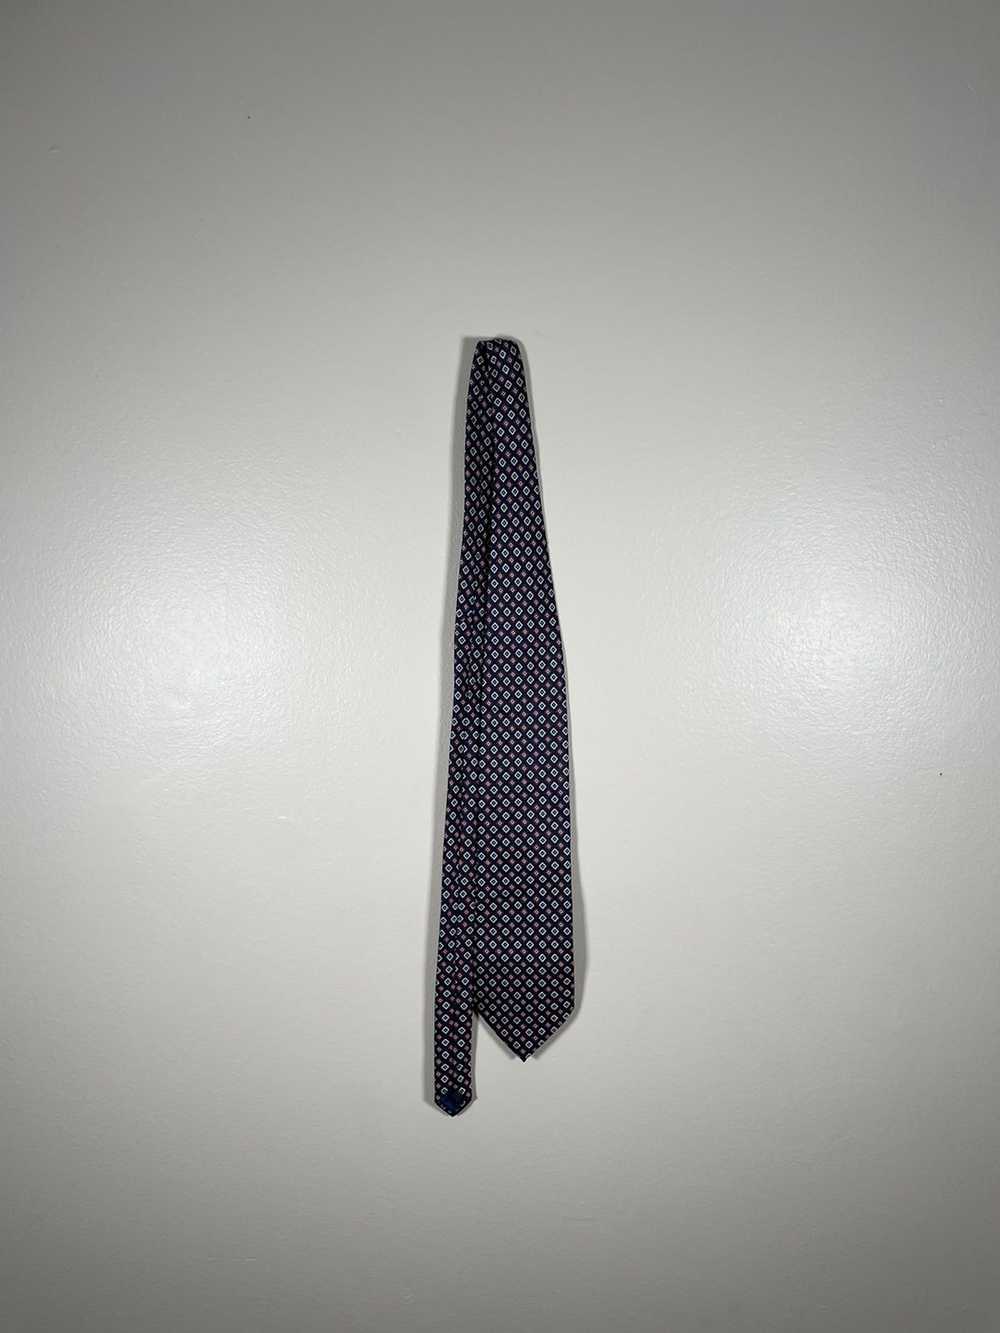 Givenchy Vintage Givenchy Tie - image 2